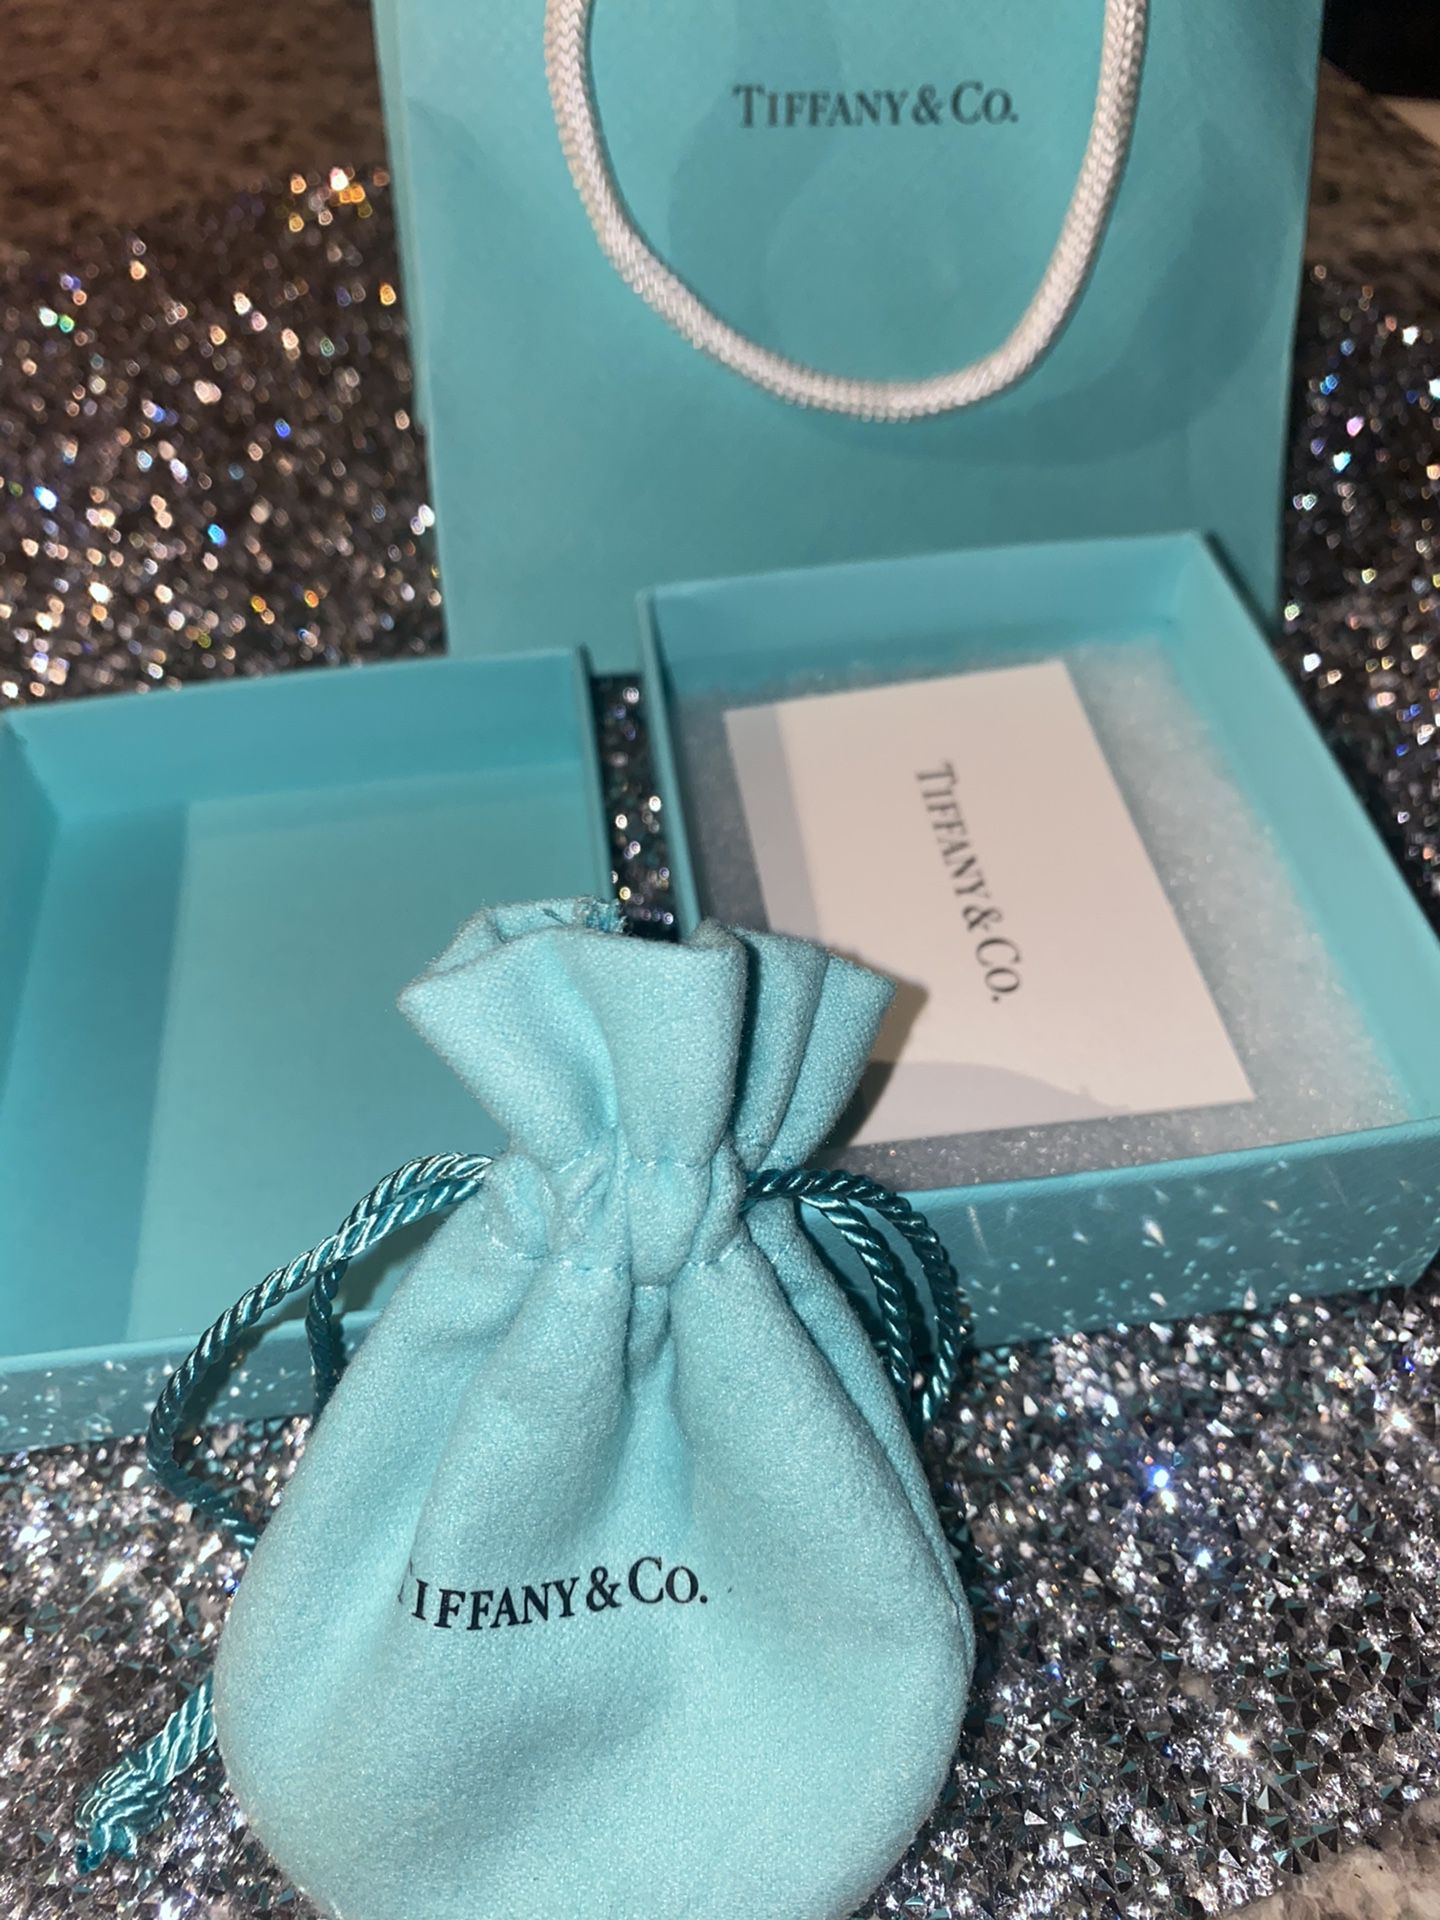 NEW Tiffany & Co. Sterling Pendant Necklace